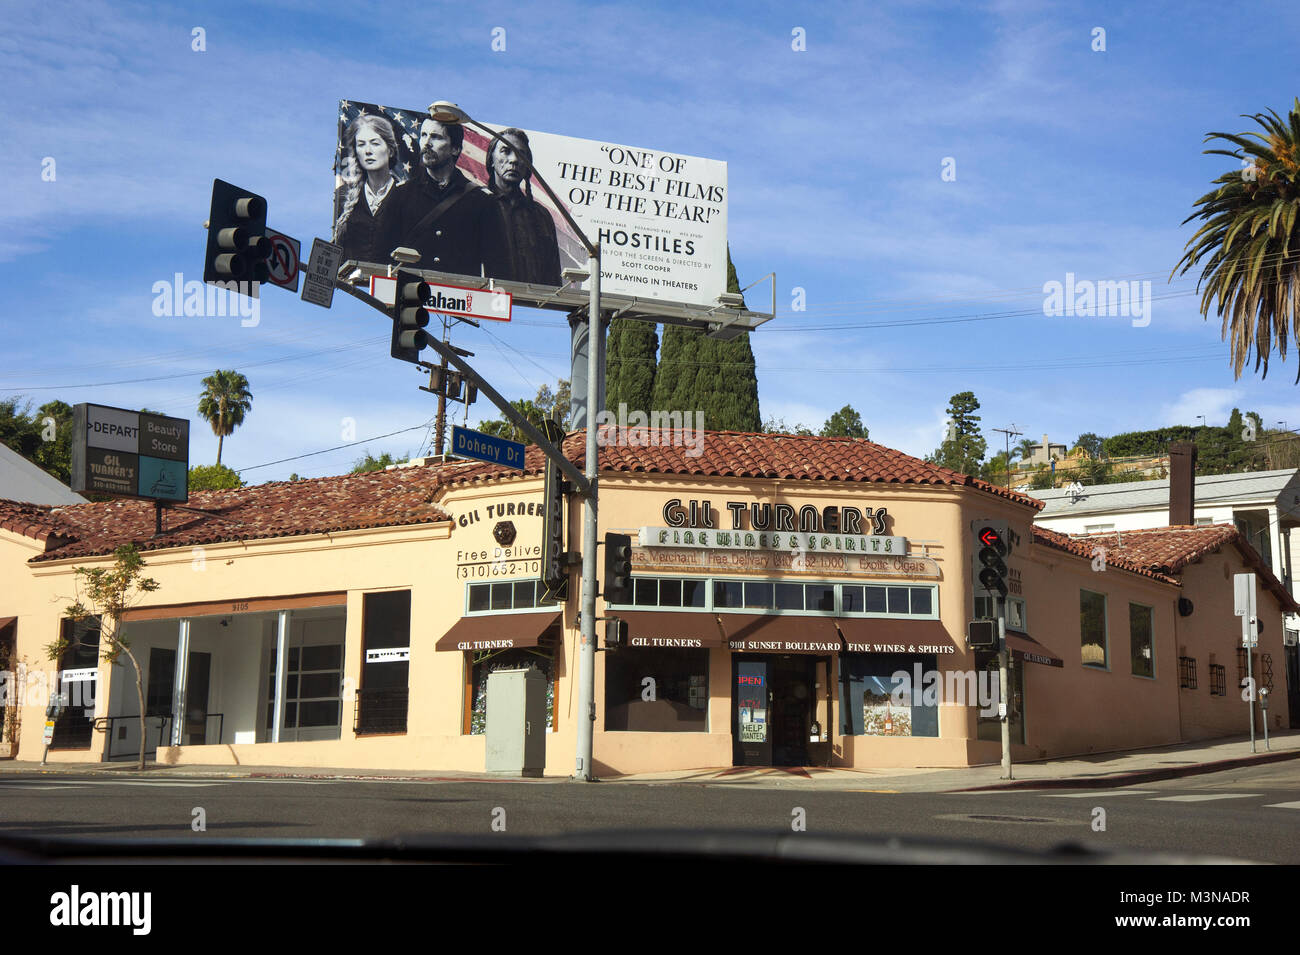 Billboard on the Sunset Strip promoting the movie Hostiles over Gil Turner's Liquor shop in West Hollywood, Los Angeles, CA Stock Photo